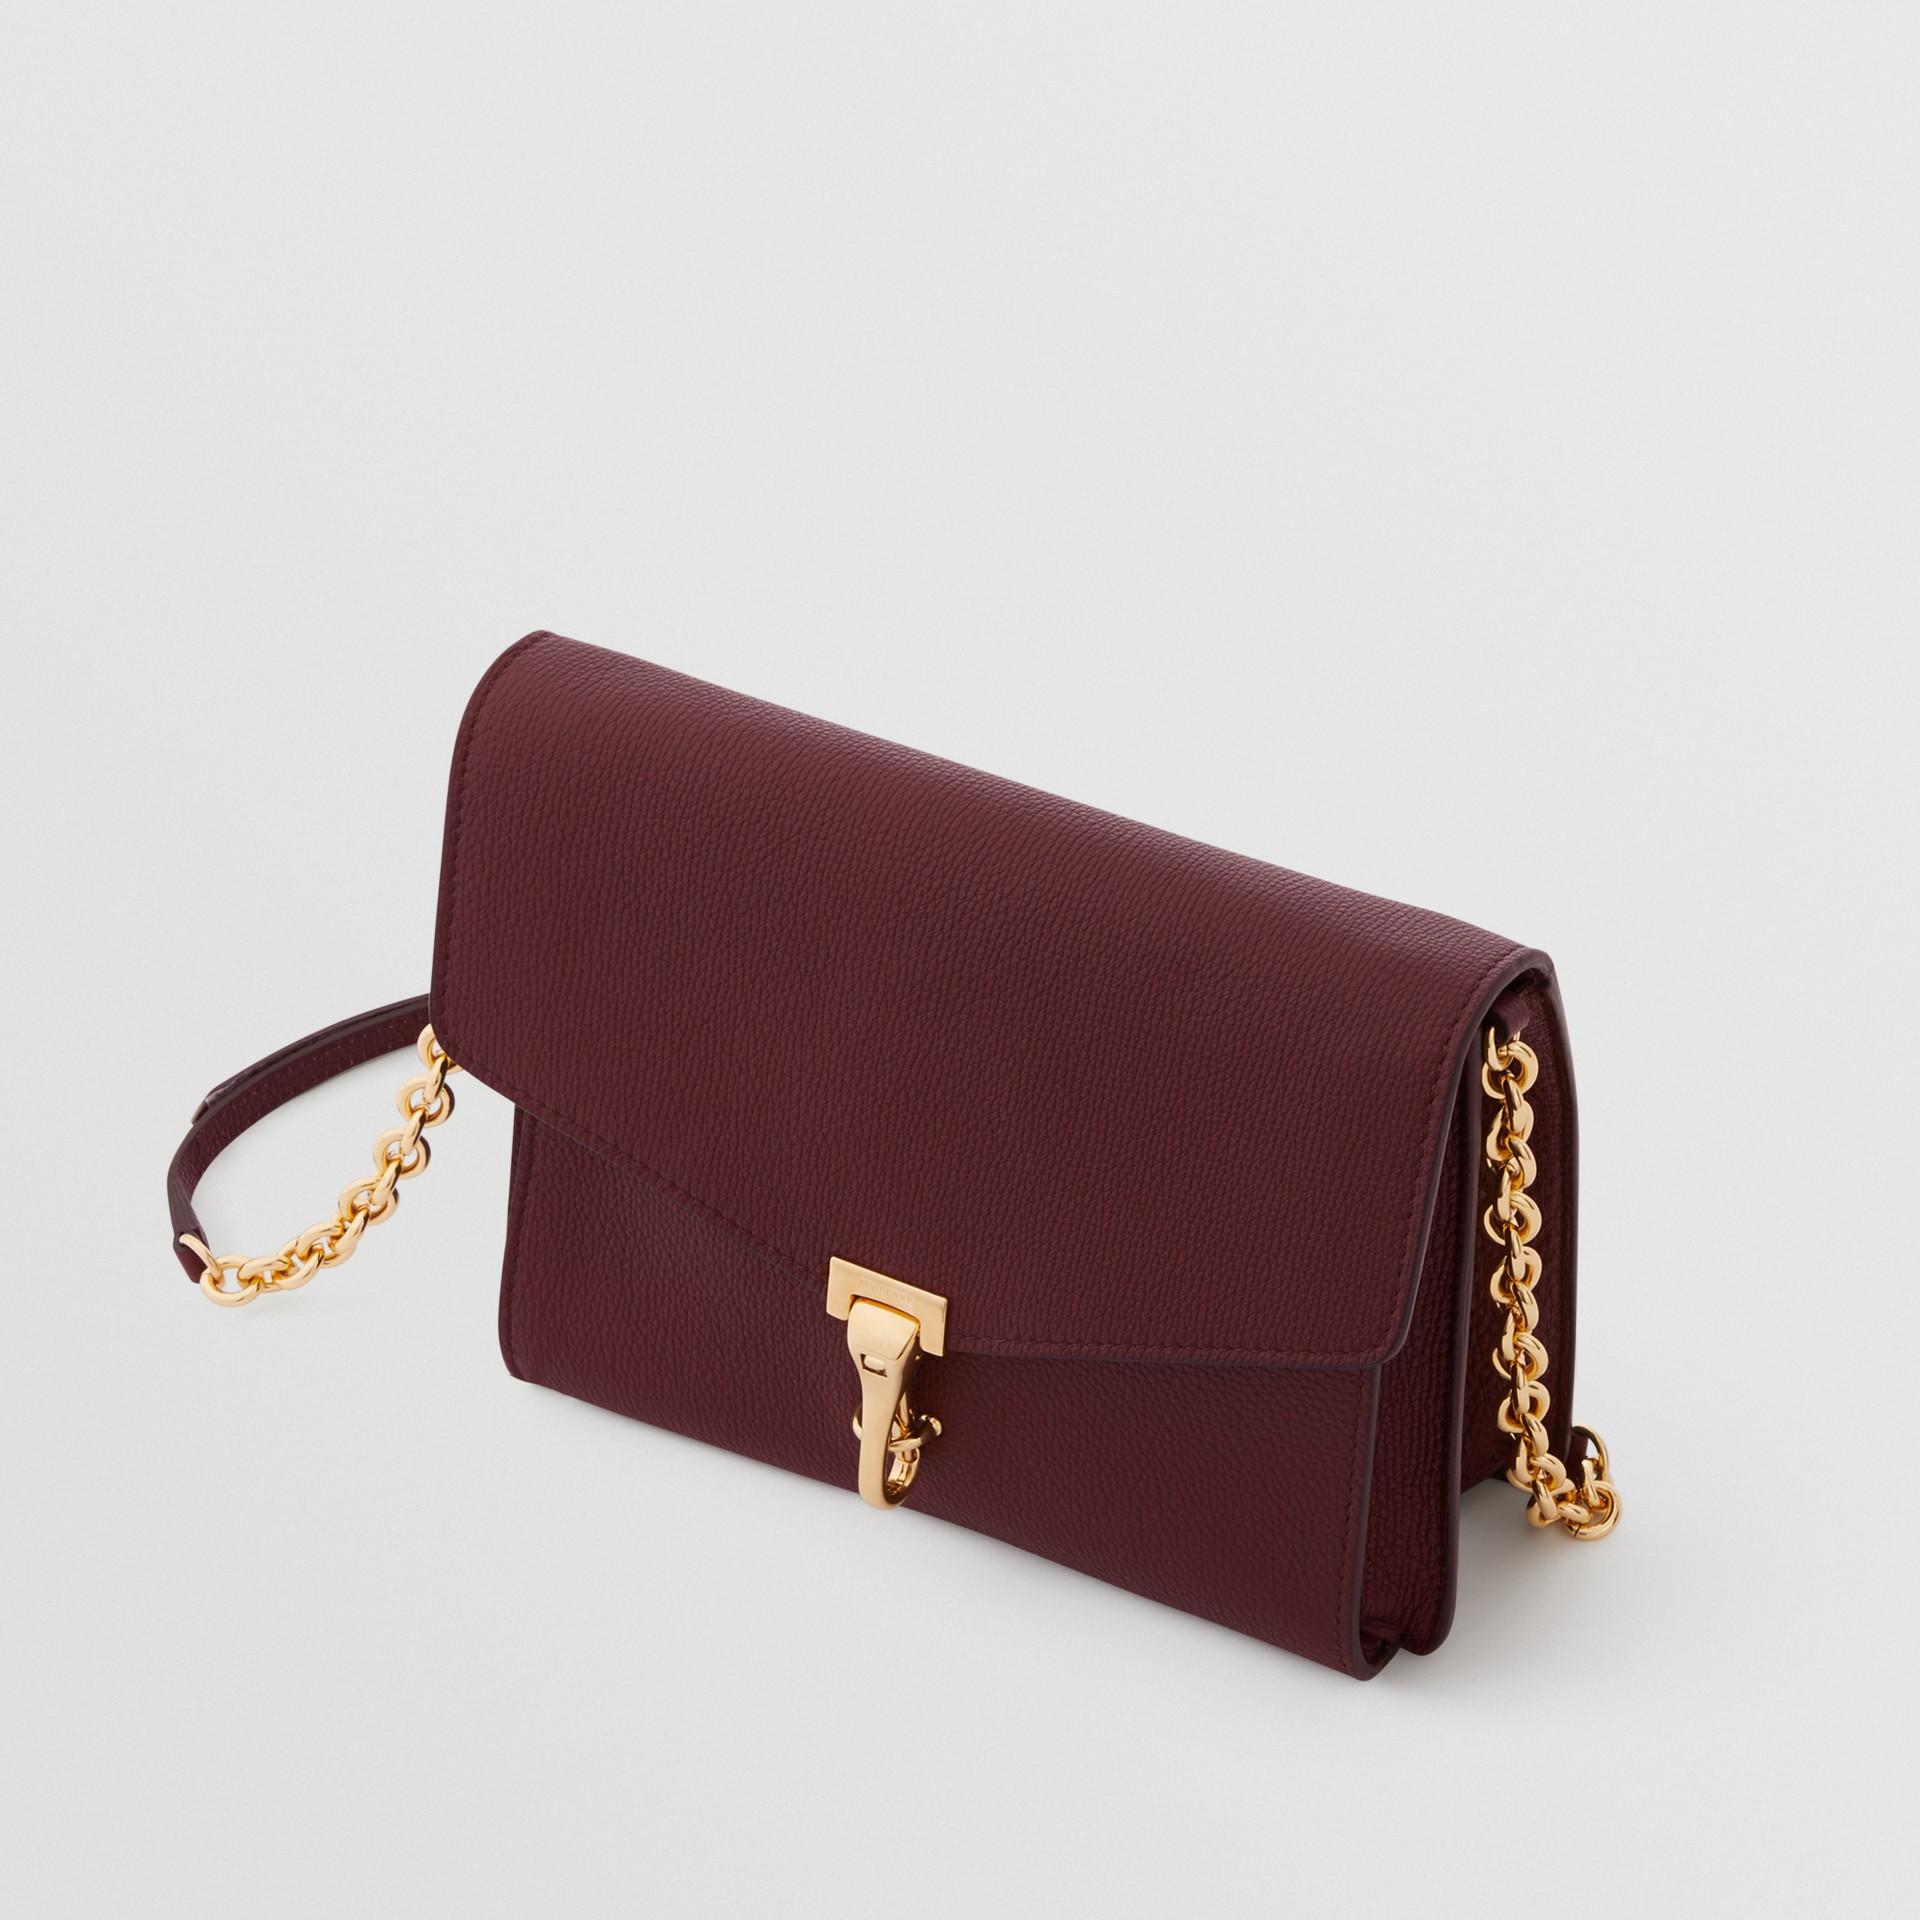 Small Leather Crossbody Bag in Mahogany Red - Women | Burberry Canada